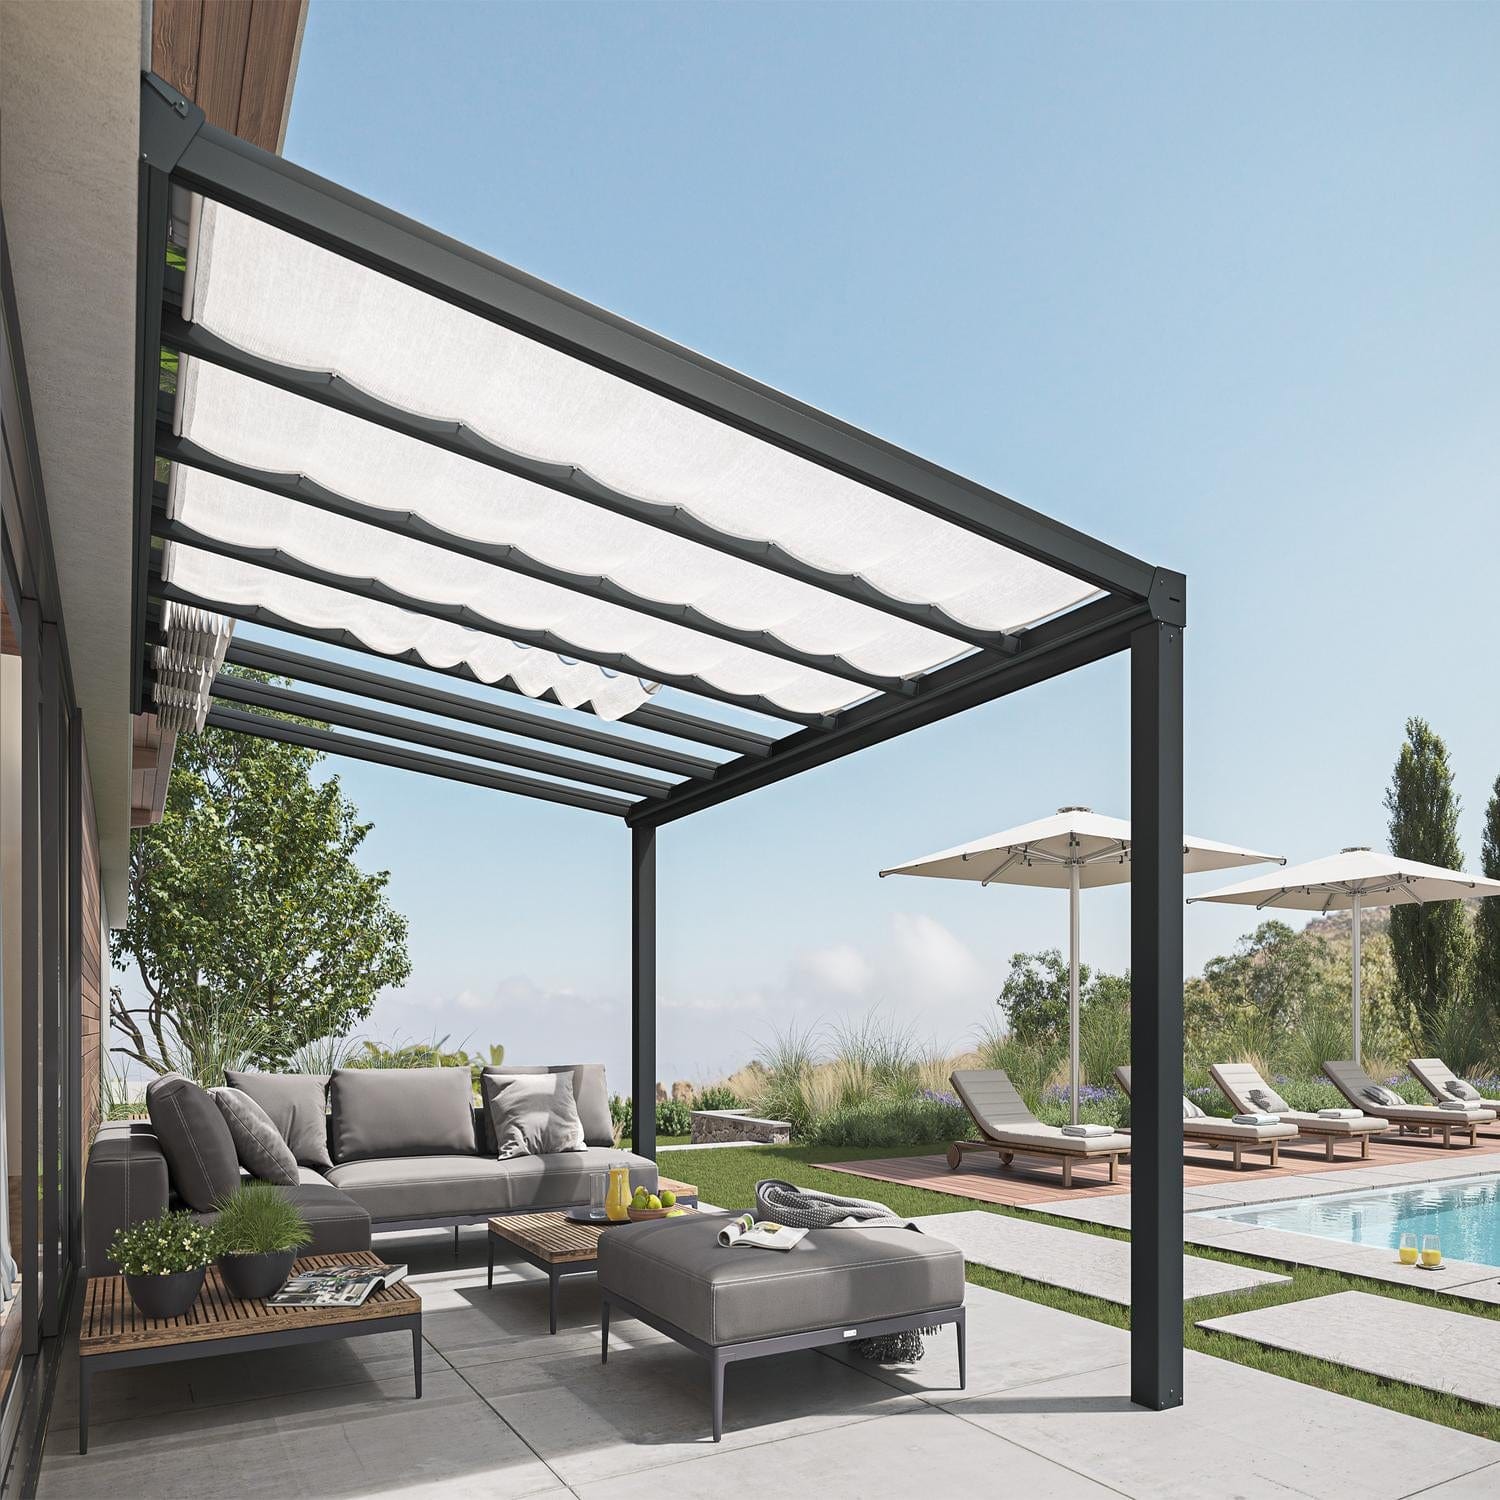 Palram - Canopia Patio Cover Accessories Palram - Canopia | Stockholm Patio Cover Roof Blinds 11x24 ft HG1095